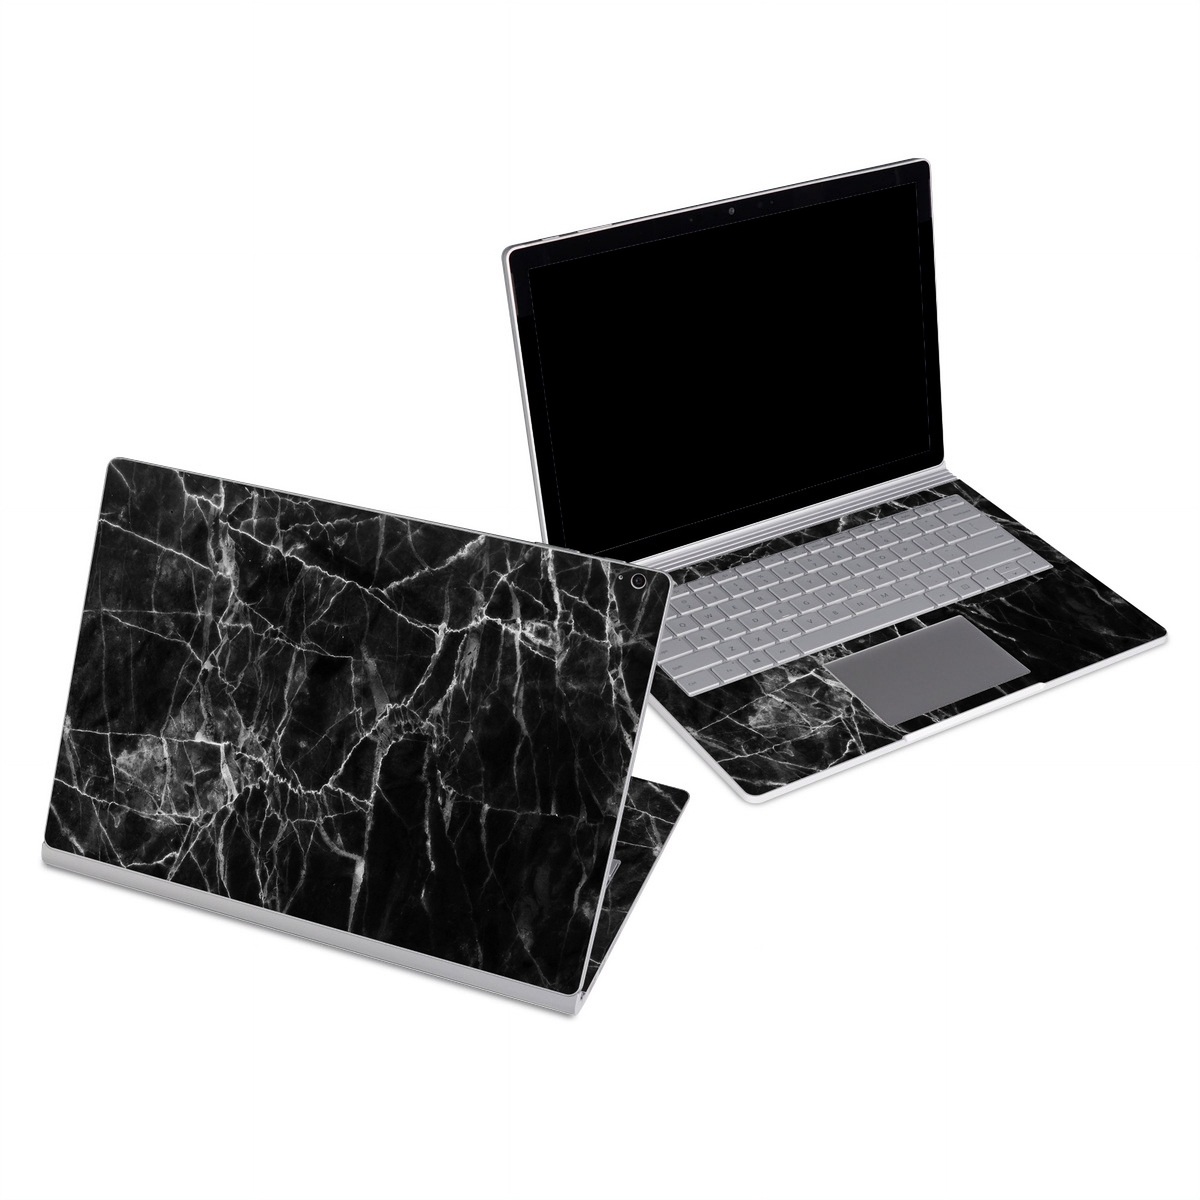 Microsoft Surface Book Series Skin design of Black, White, Nature, Black-and-white, Monochrome photography, Branch, Atmosphere, Atmospheric phenomenon, Tree, Sky, with black, white colors